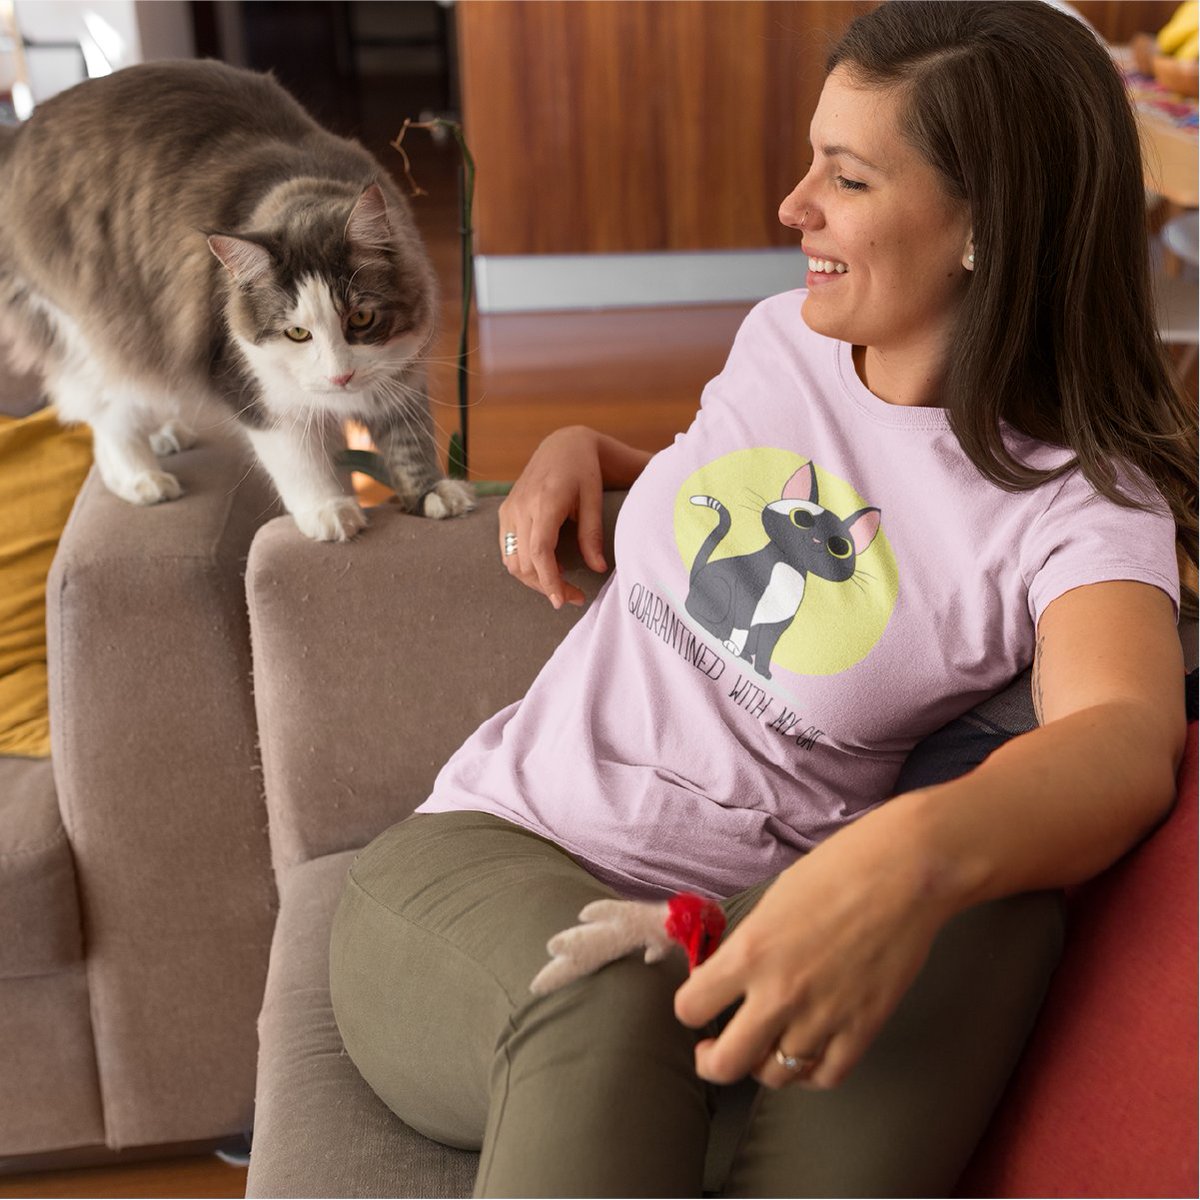 Get and flaunt this t-shirt👕👚 in your own style! Or offer it as a gift!🎁⁠ ⁠ Check the details to buy in the below link l8r.it/EtFq ⁠ #cutecats #tshirtdesign #tshirtslovers #kawaiistuff #cutecats #ilovemycat #catlover #tshirtshop #newstyle